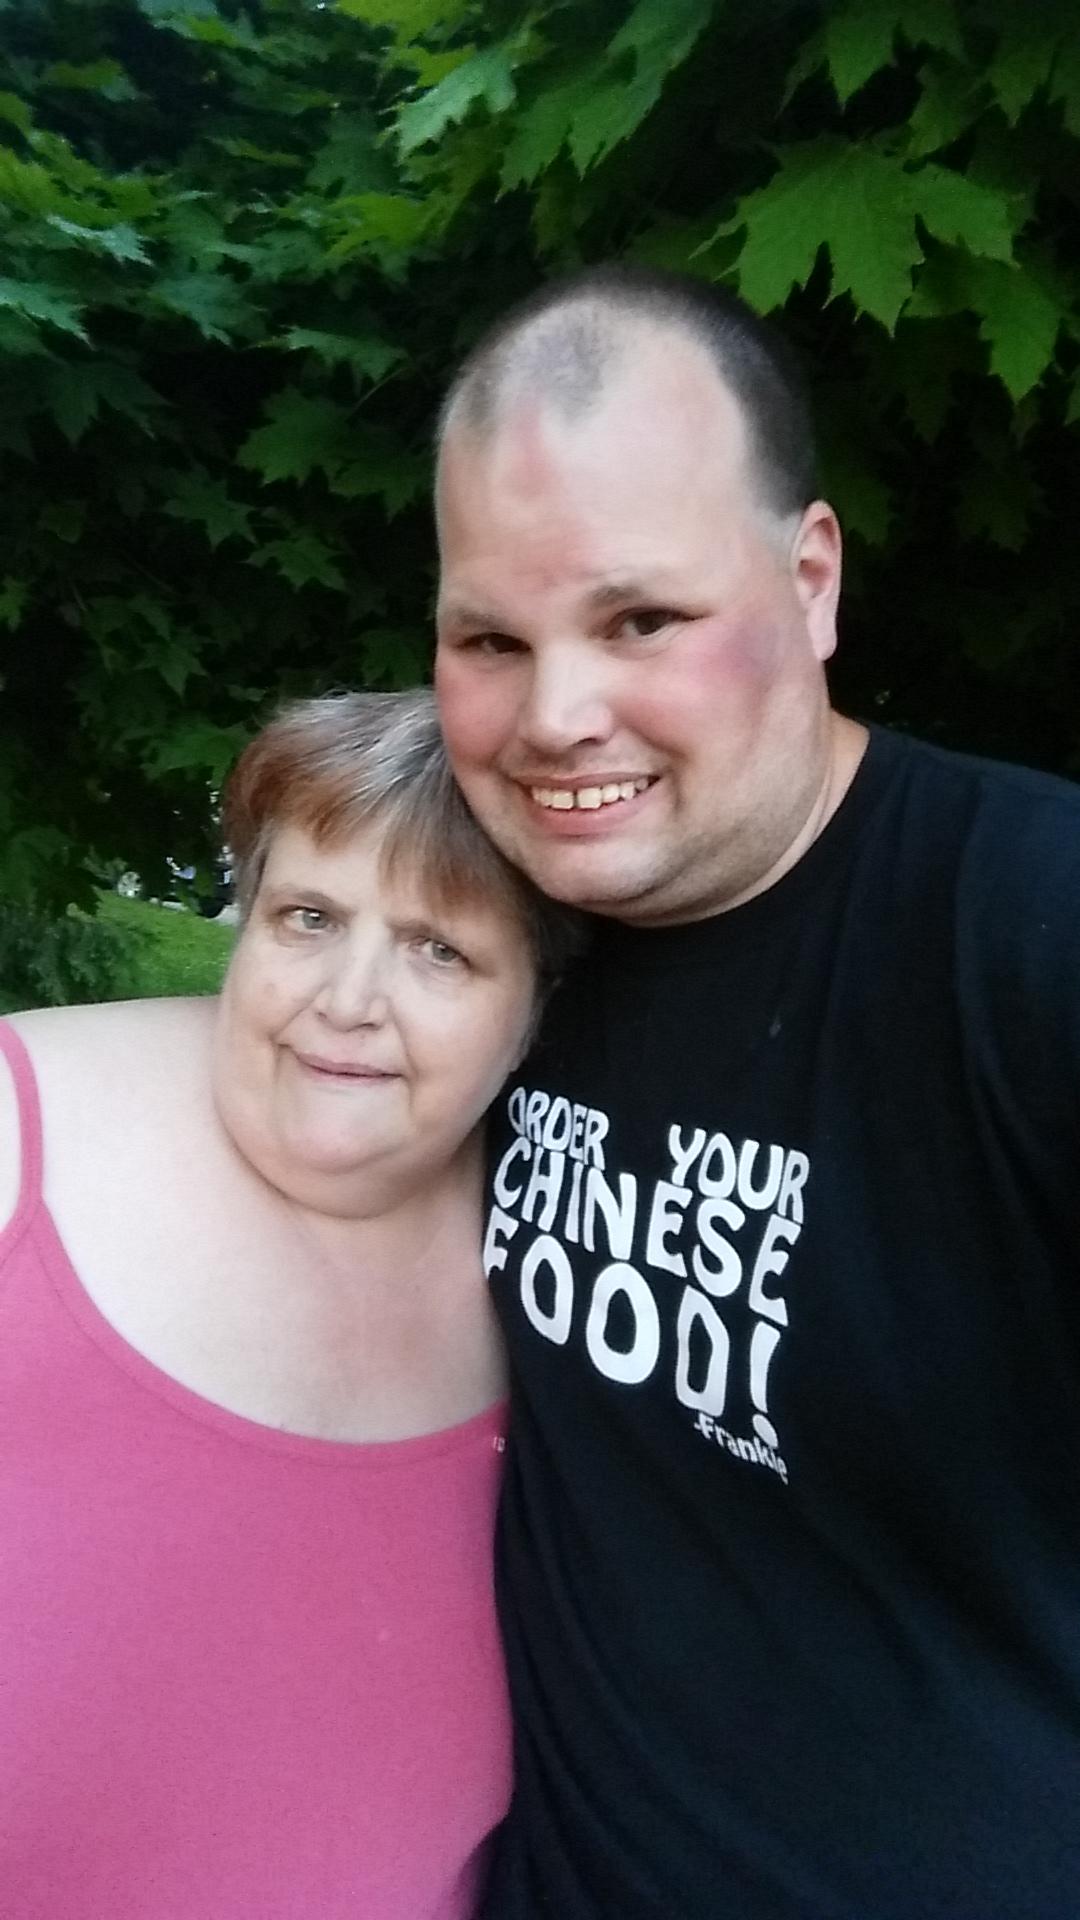 The Very Beautiful Lady Just got in a Picture Taken with me and she loves me and my videos and i do a great job all the time and my videos are awesome Especially my Weather Reports on the Internet and i do such as Great Job.